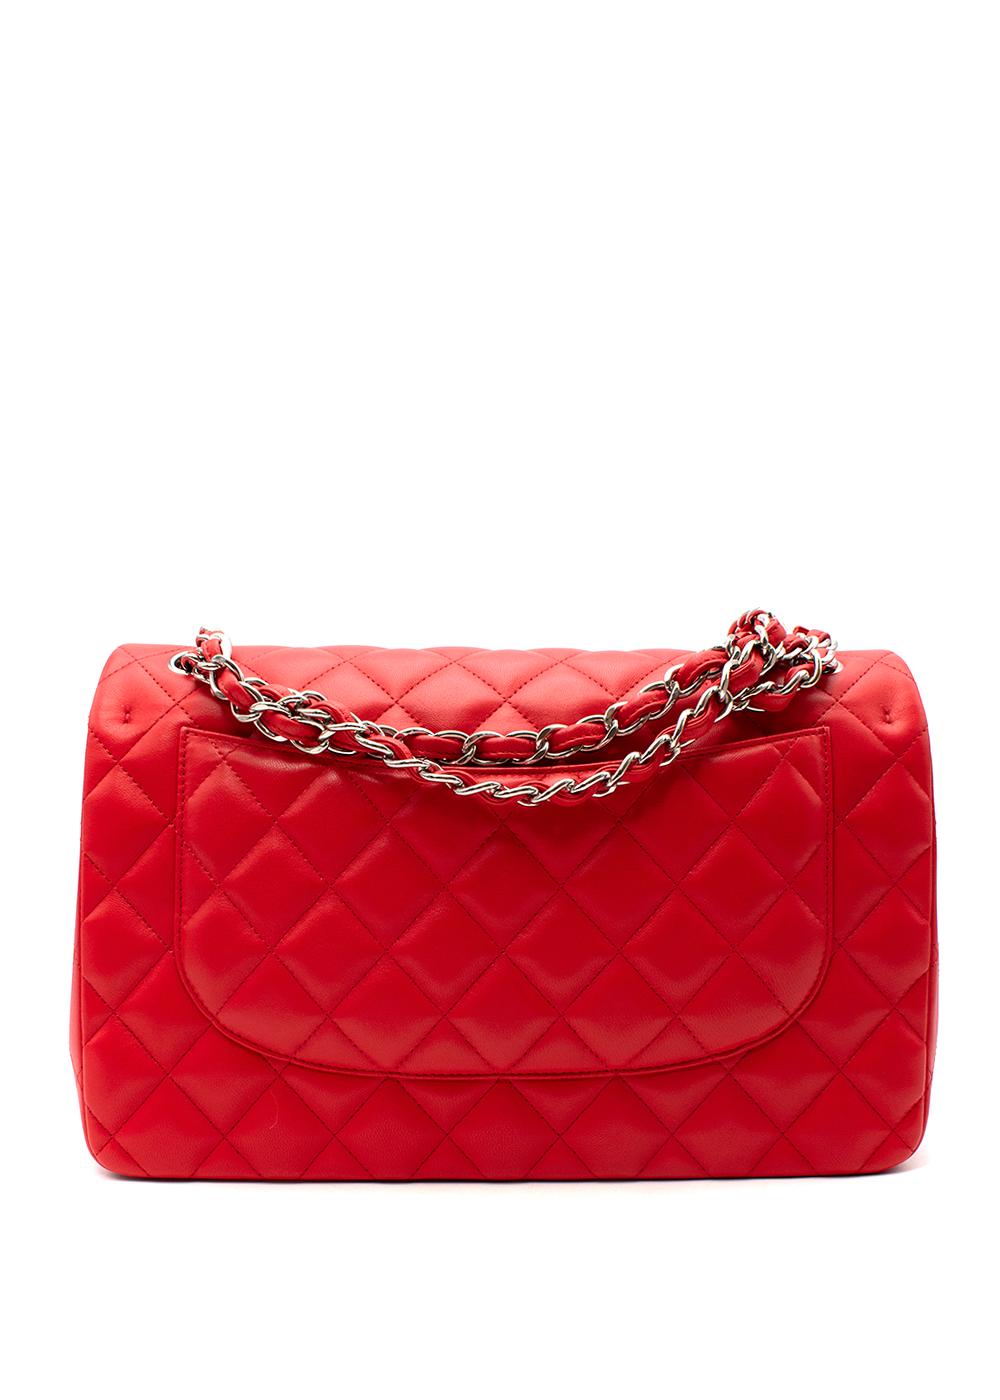 Chanel Red Quilted Leather Jumbo Double Flap Bag  In New Condition For Sale In London, GB